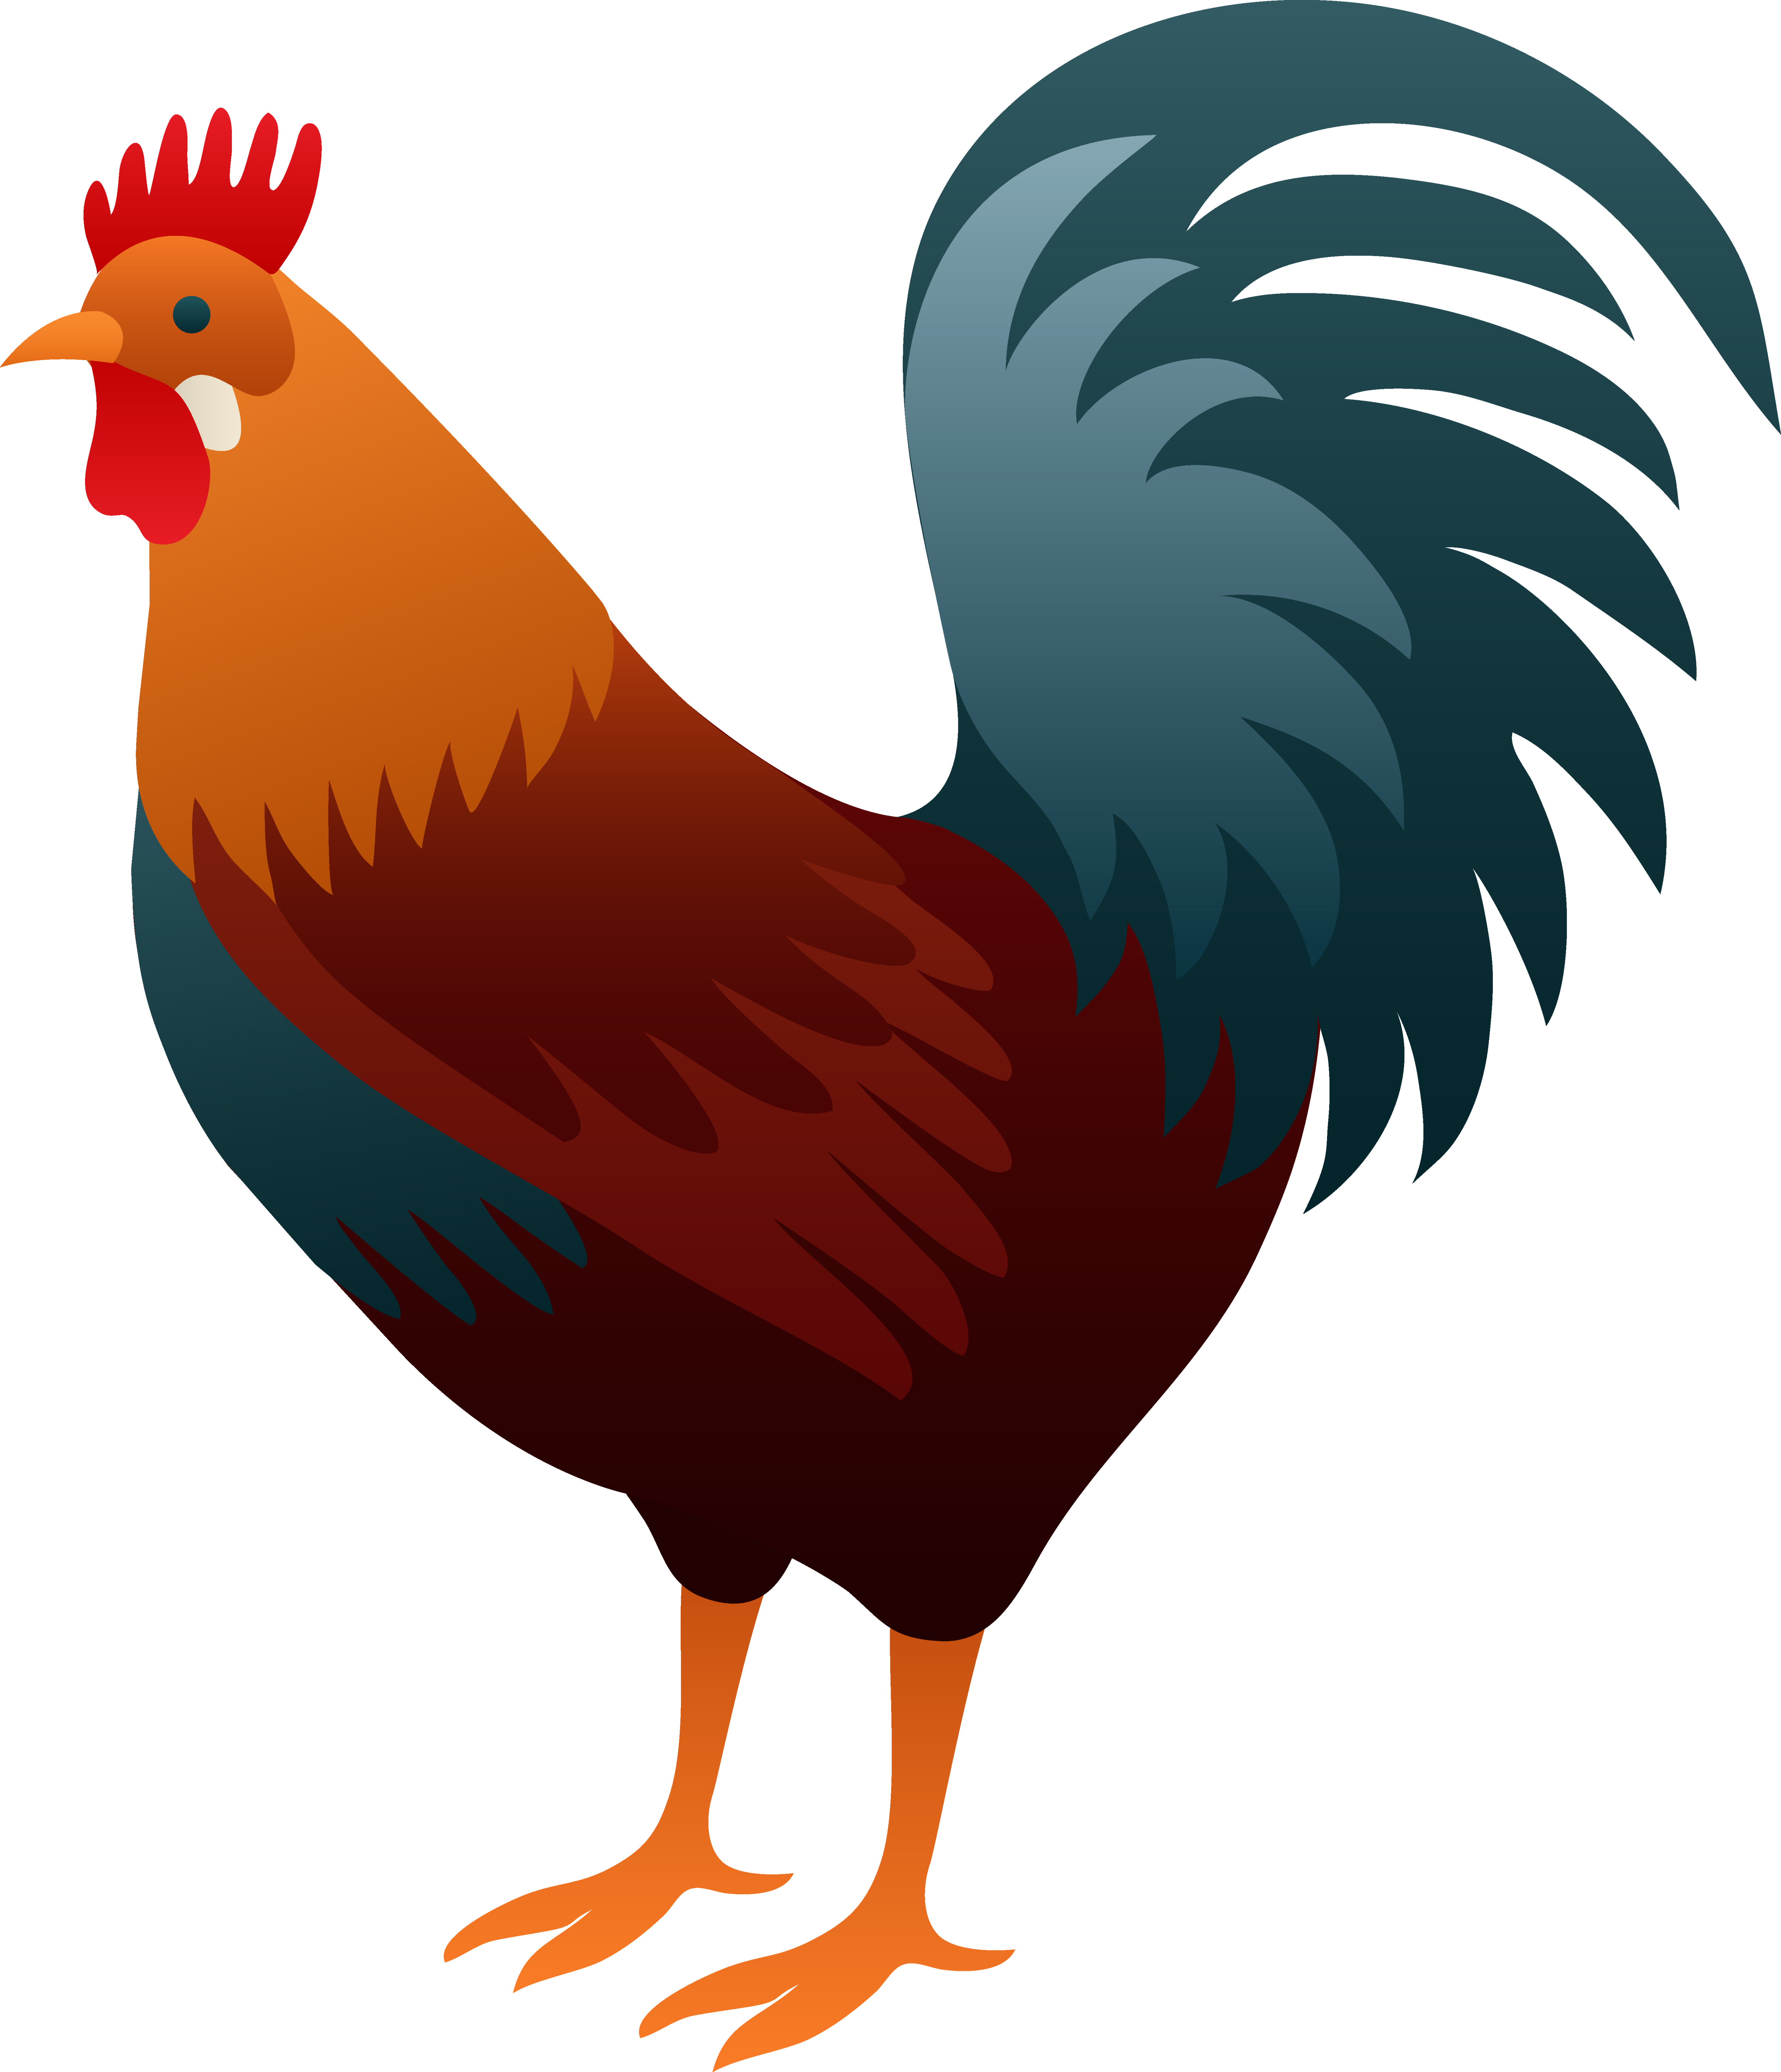 Rooster Clipart u0026amp; Roo